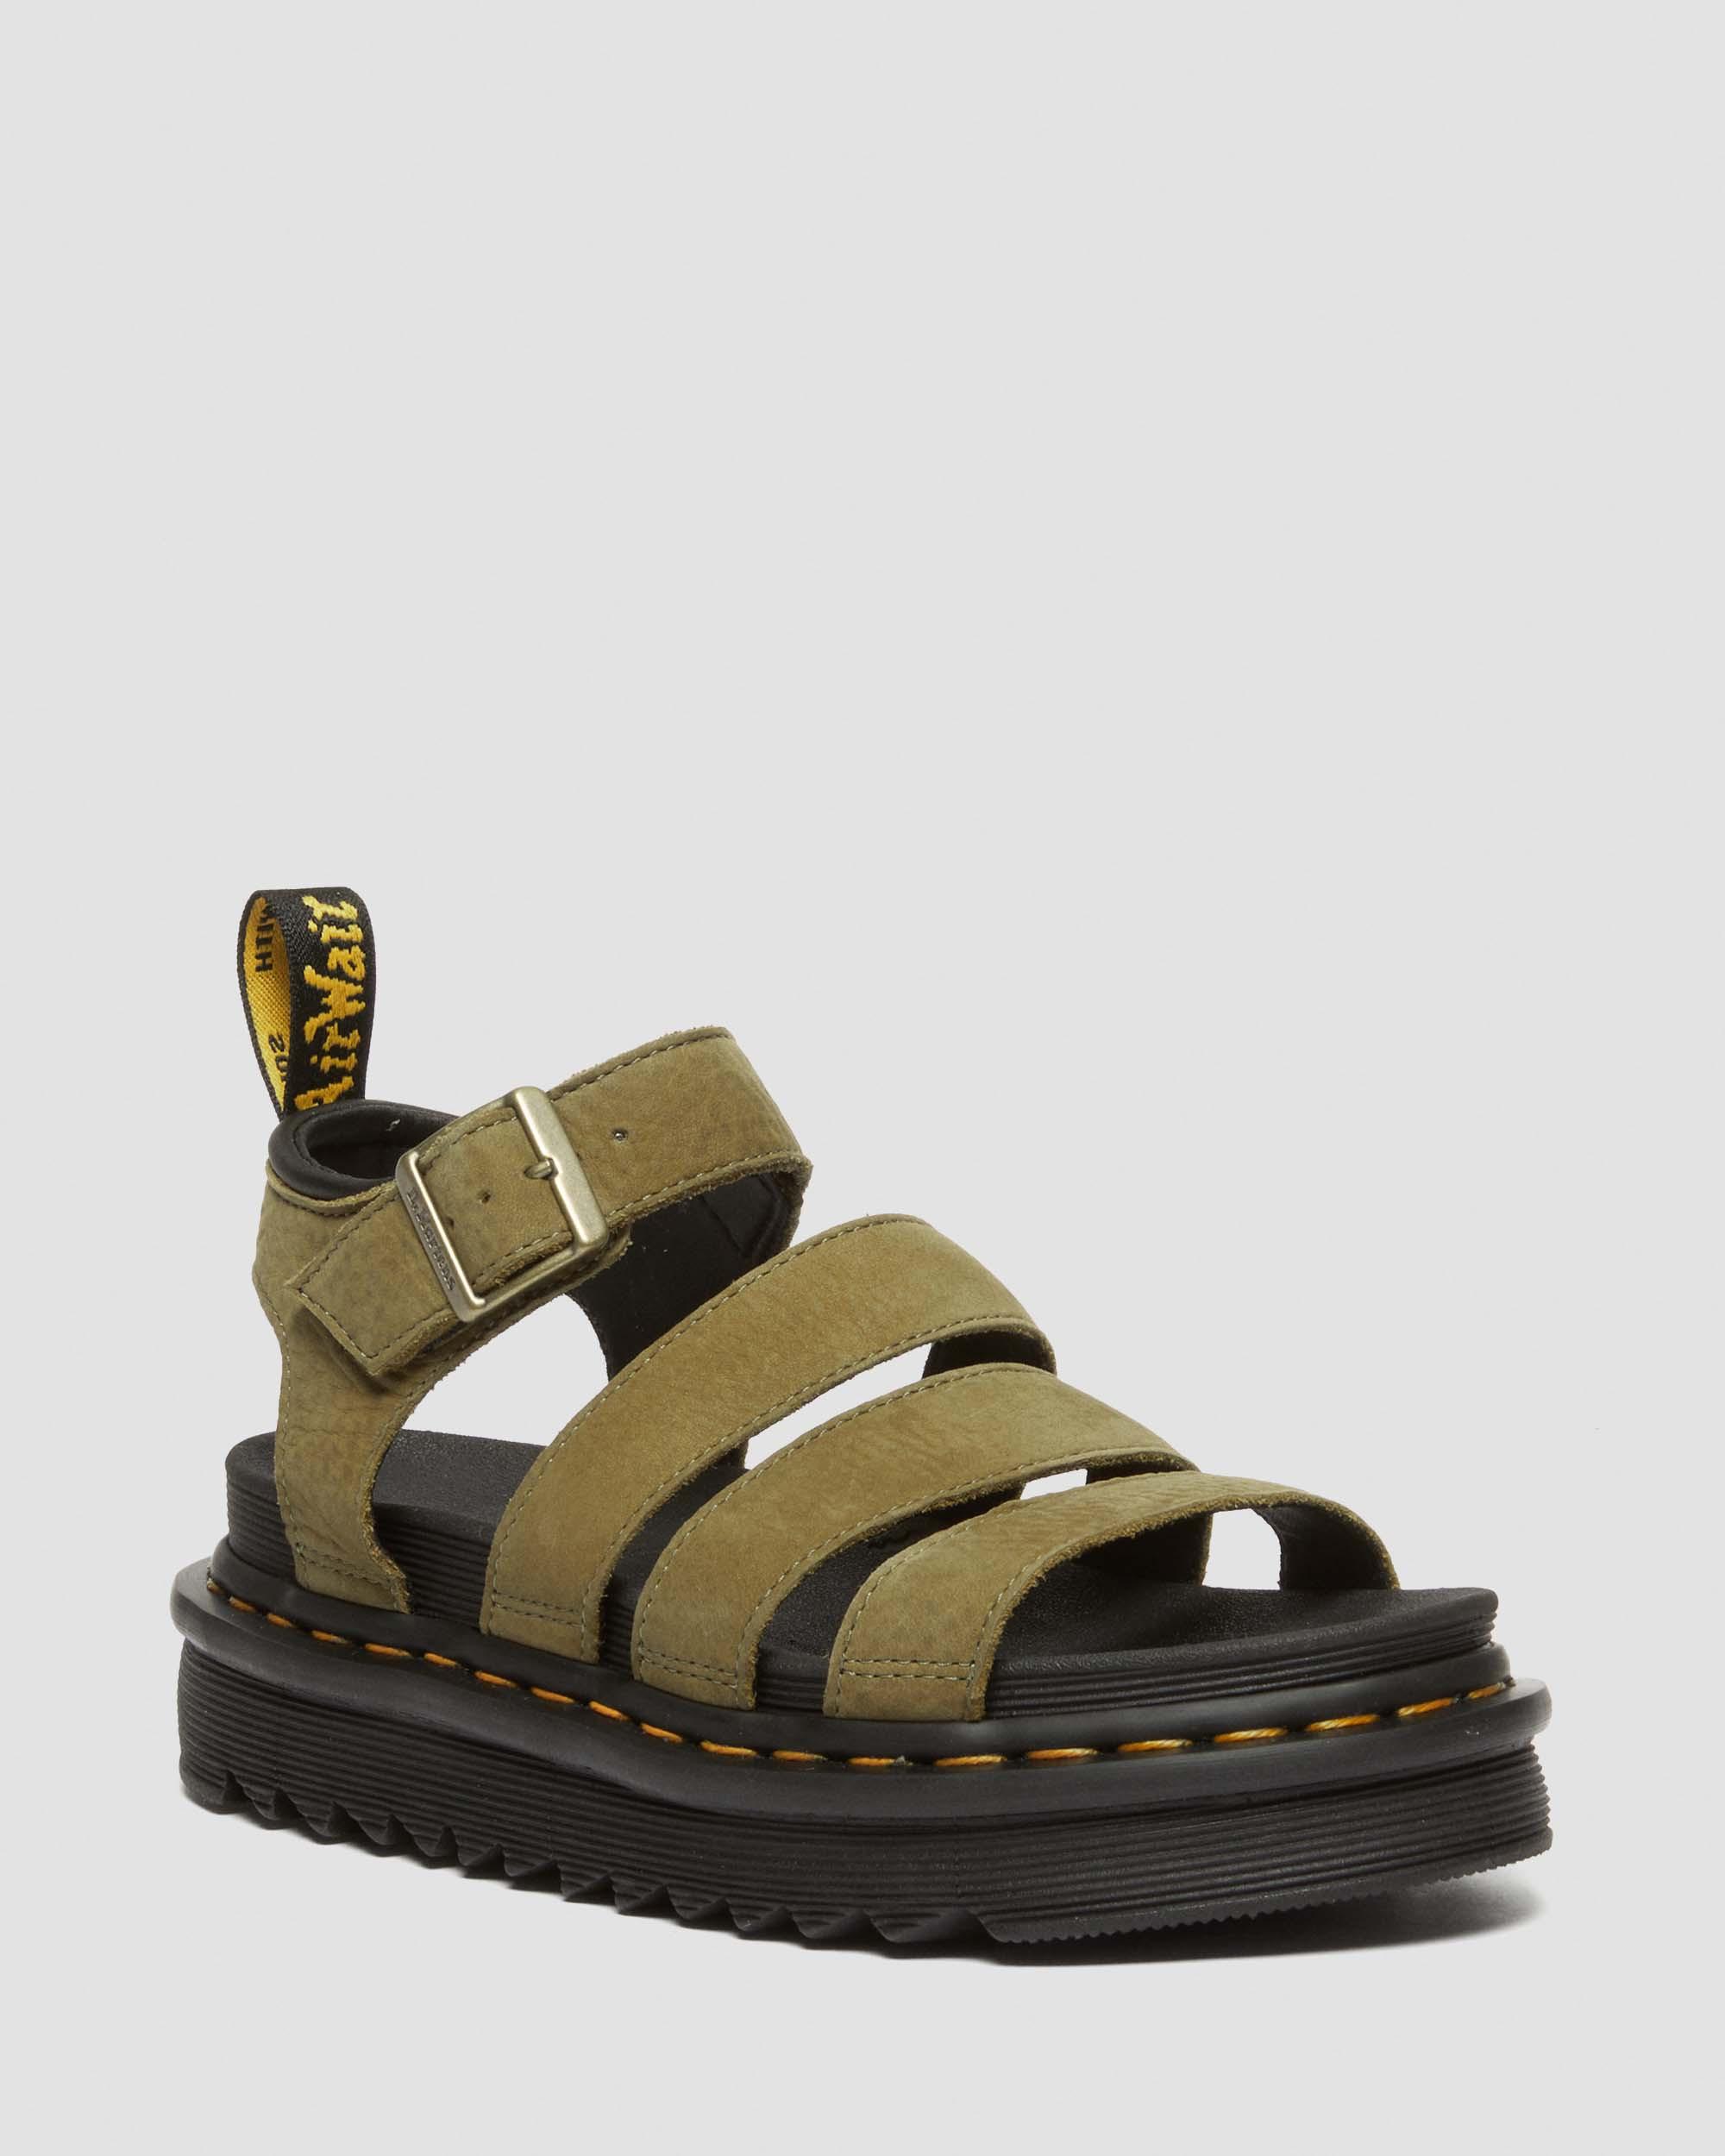 Blaire Tumbled Nubuck Leather Sandals in Muted Olive